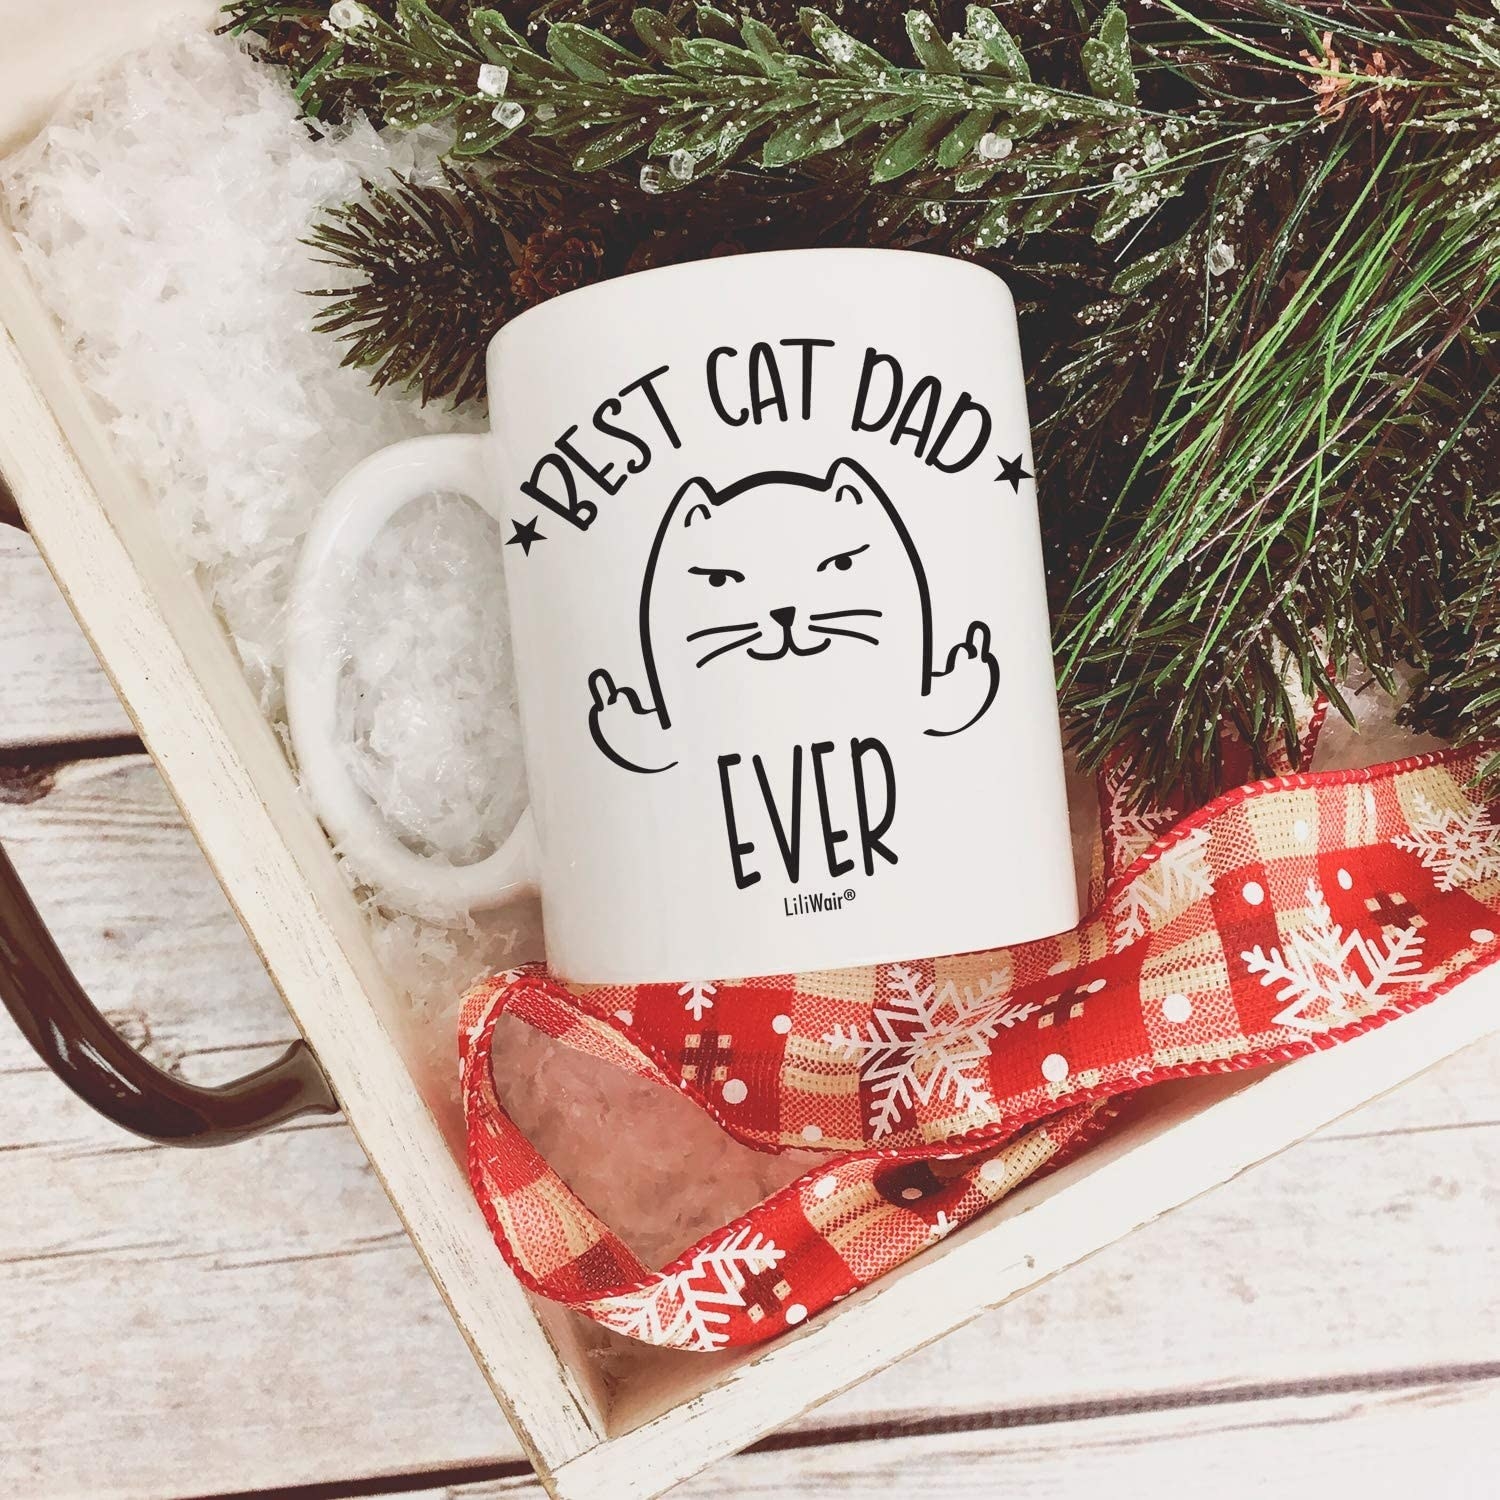 White mugs with a cartoon cat giving two middle fingers with text on image that says best cat dad ever